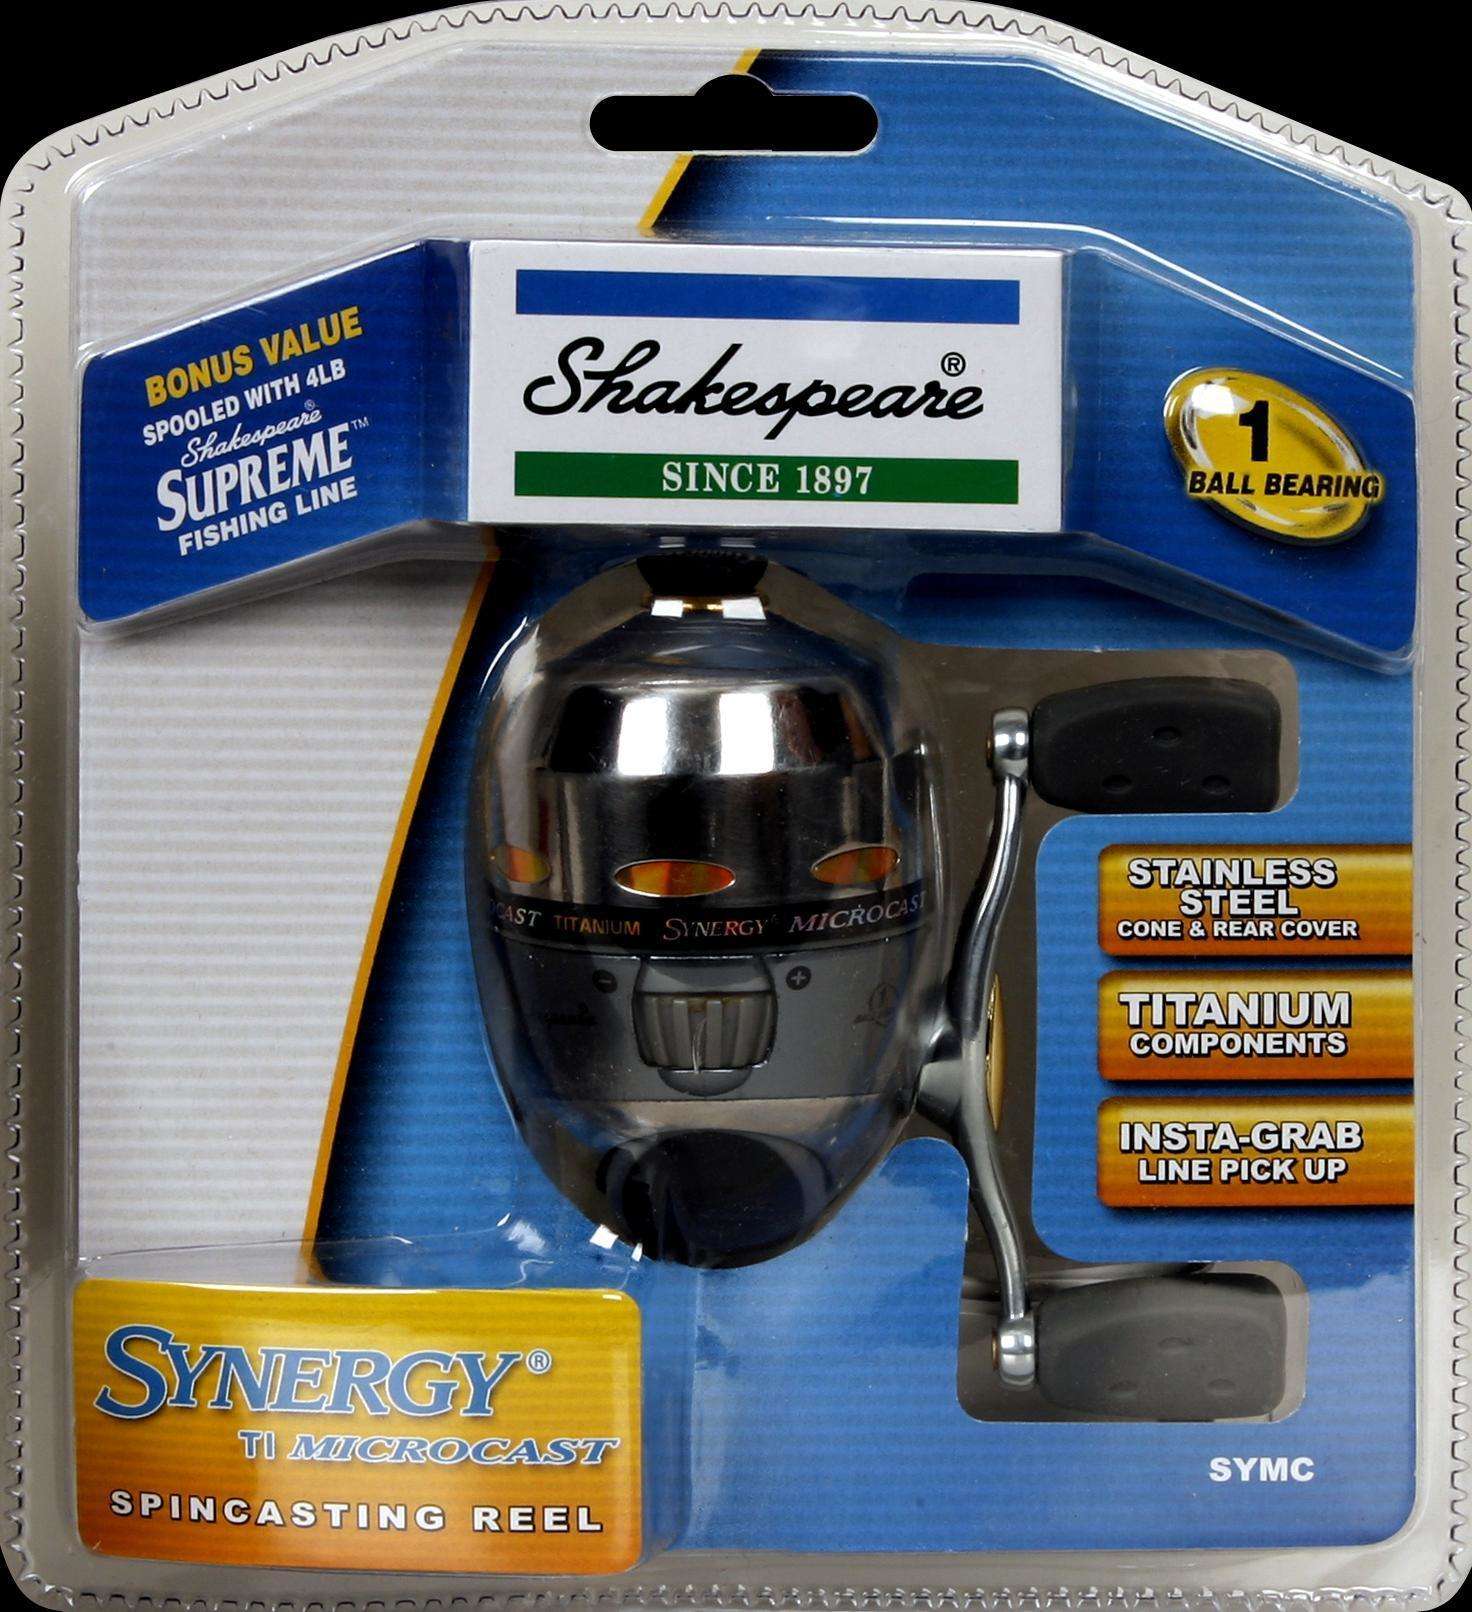 Shakespeare Synergy TI Microspin Spincasting Fishing Reel - Stainless Steel